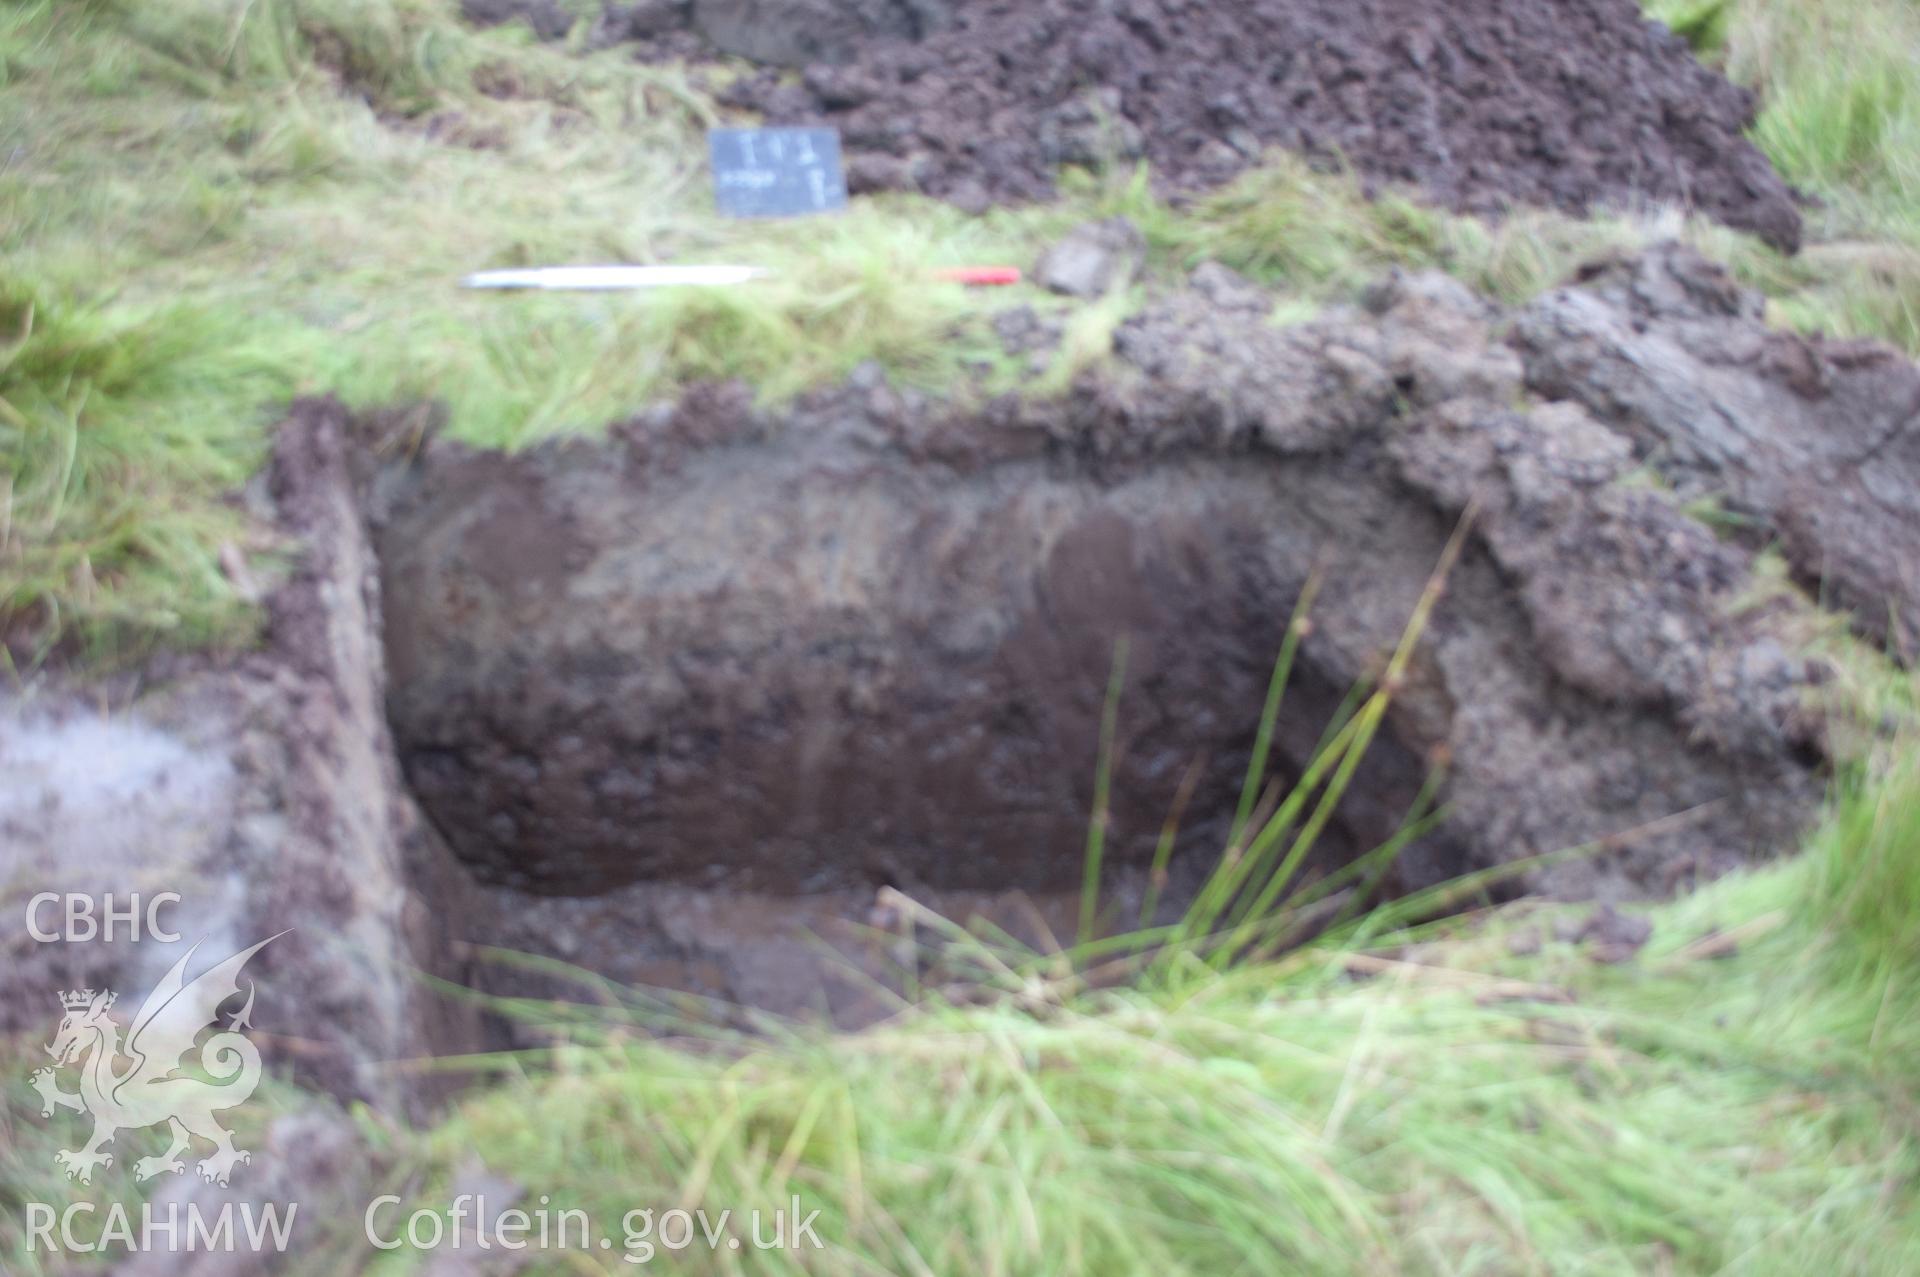 Digital photograph showing view from west of launch pit 1 post excavation. Photographed during Gwynedd Archaeological Trust's archaeological watching brief of water main renewal in Dolgellau on 28th July 2017. Project no. G2528.